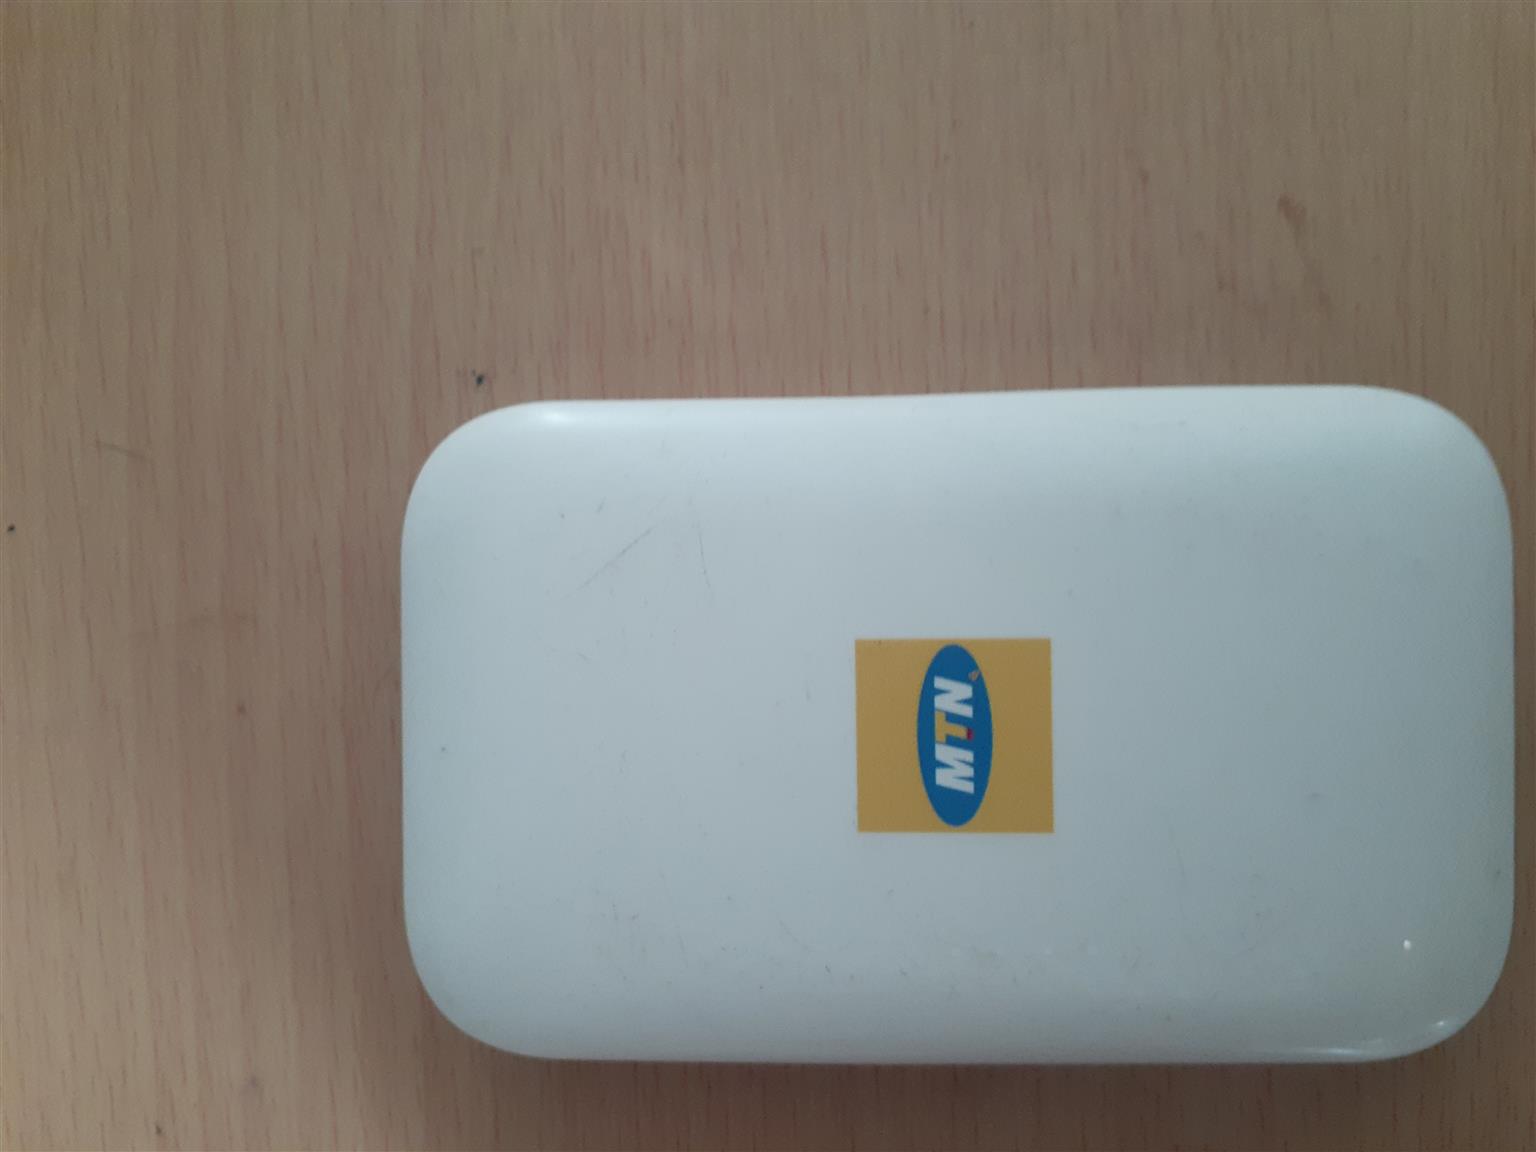 Mtn mobile wifi router 